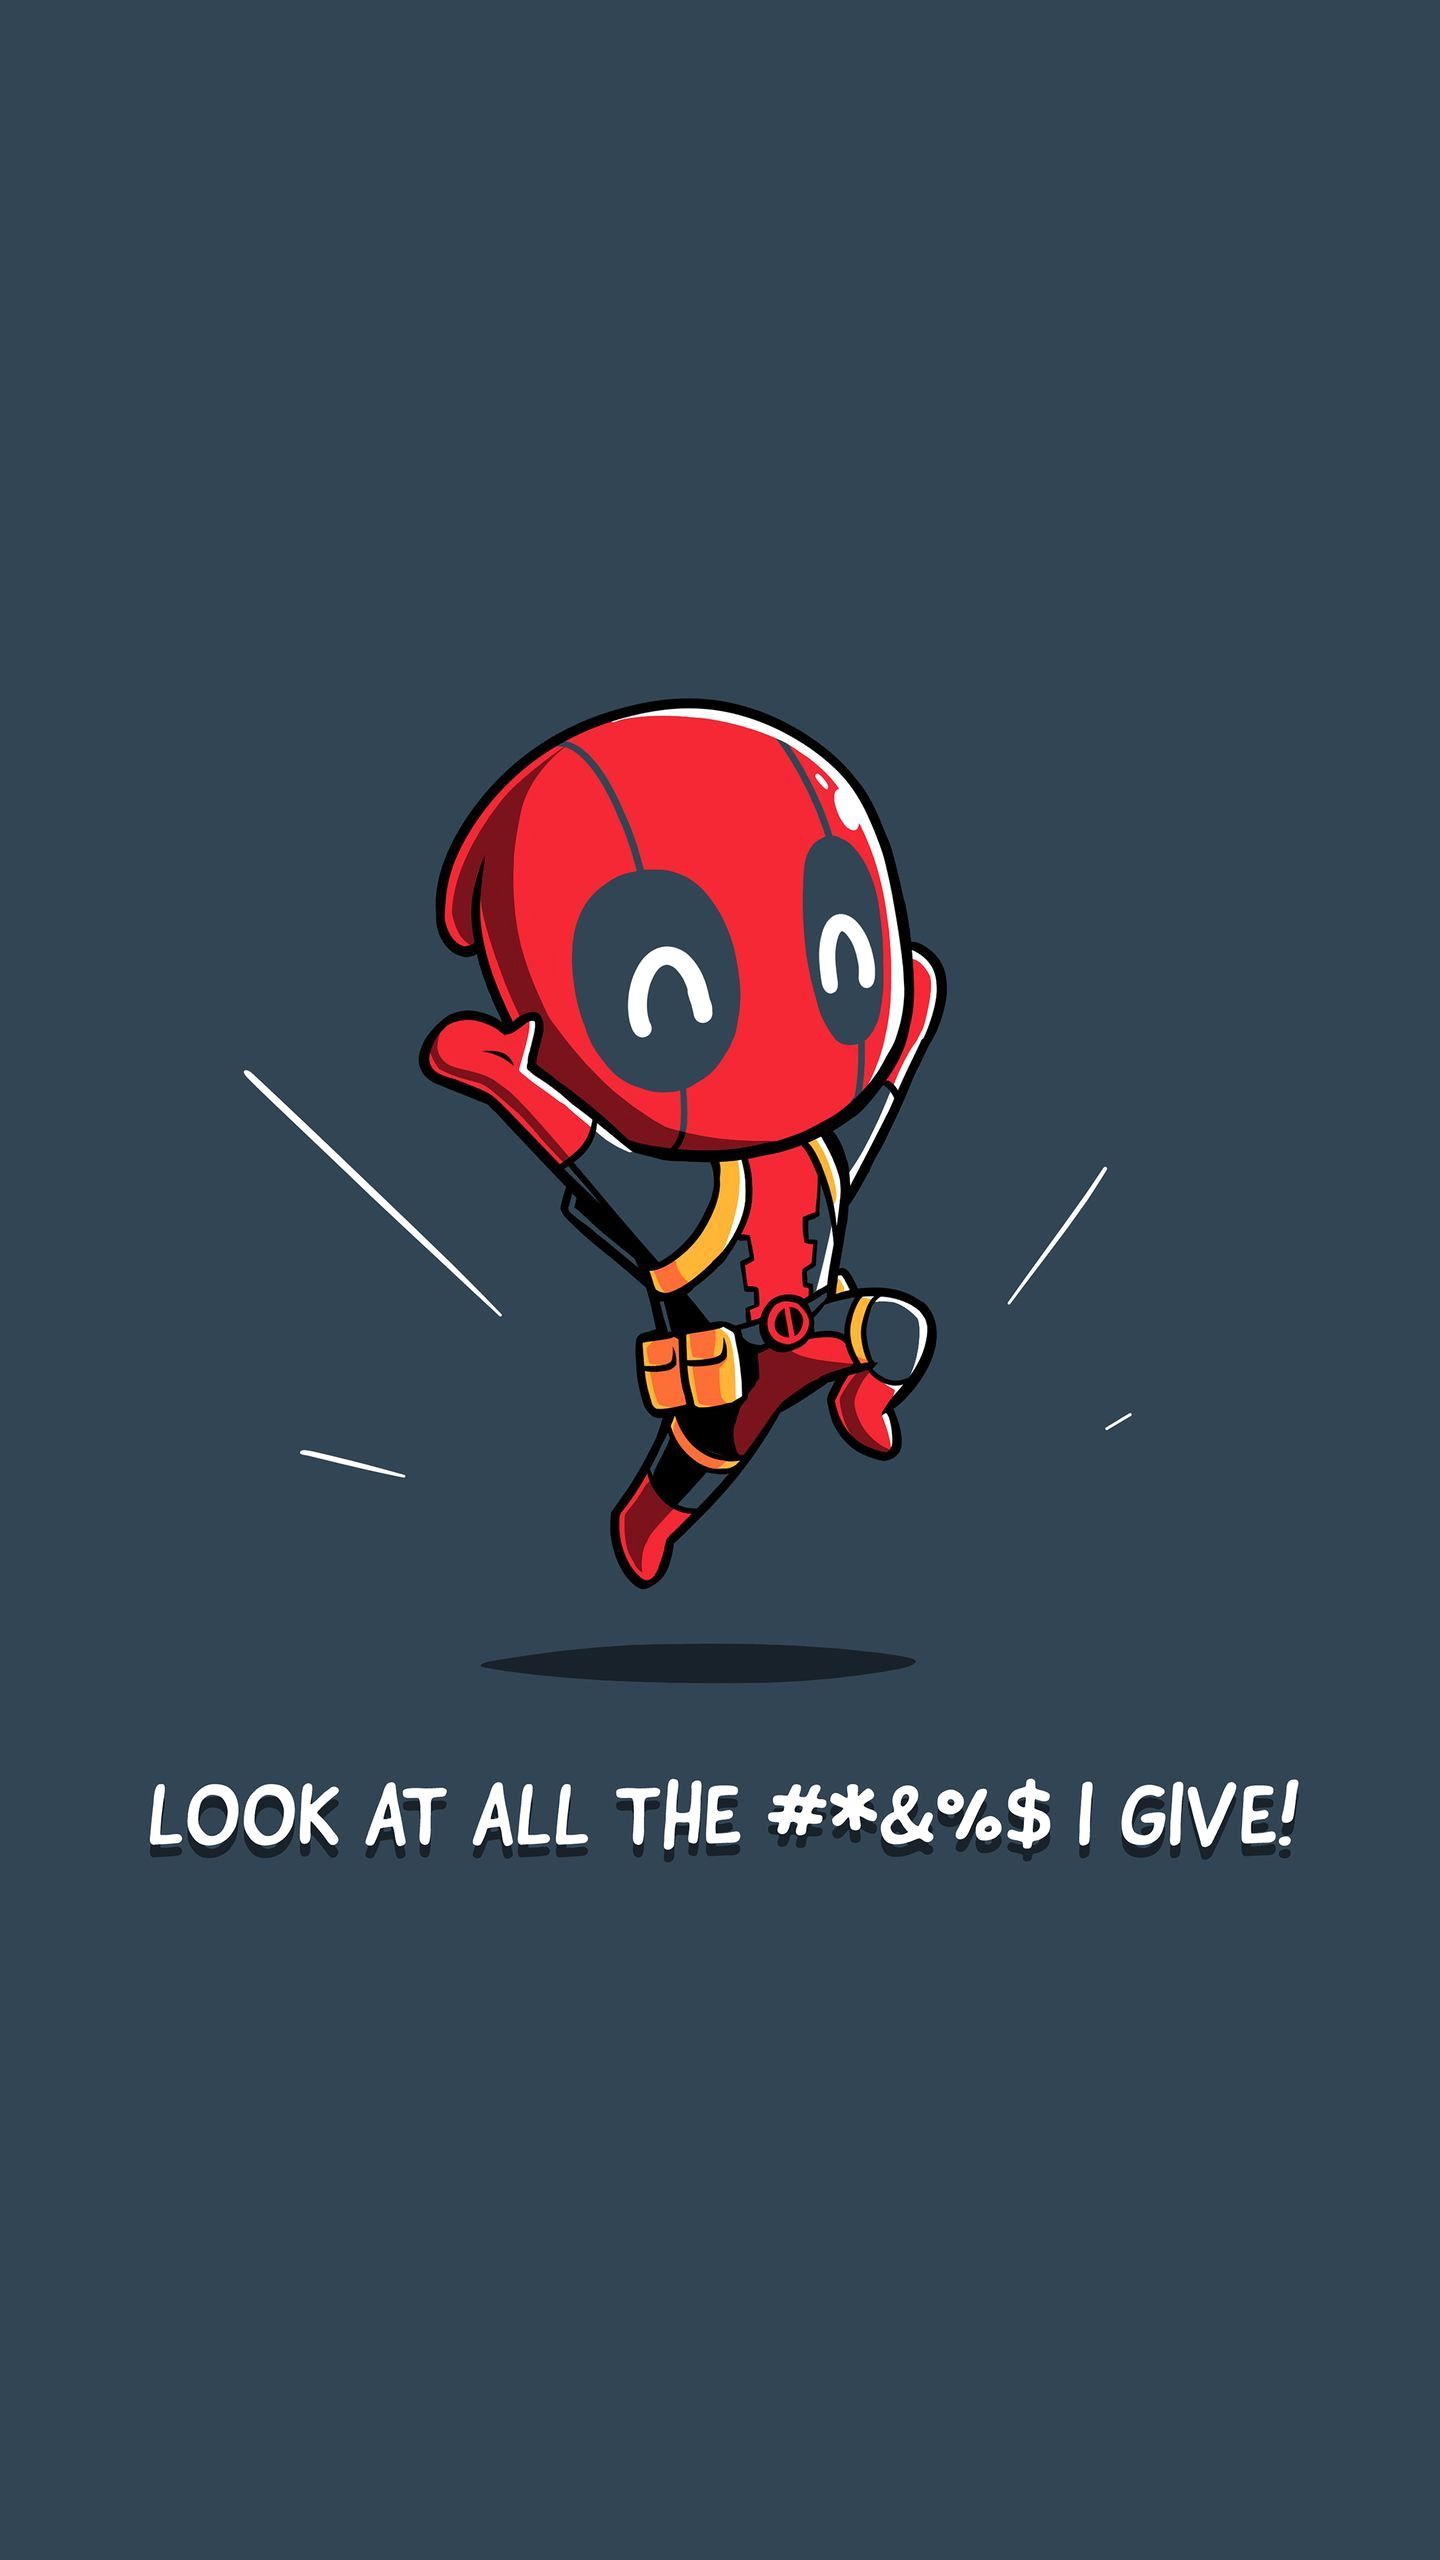 Beautiful Which Deadpool Character Are You Take This Quiz To Know. Deadpool funny, Deadpool wallpaper iphone, Deadpool wallpaper